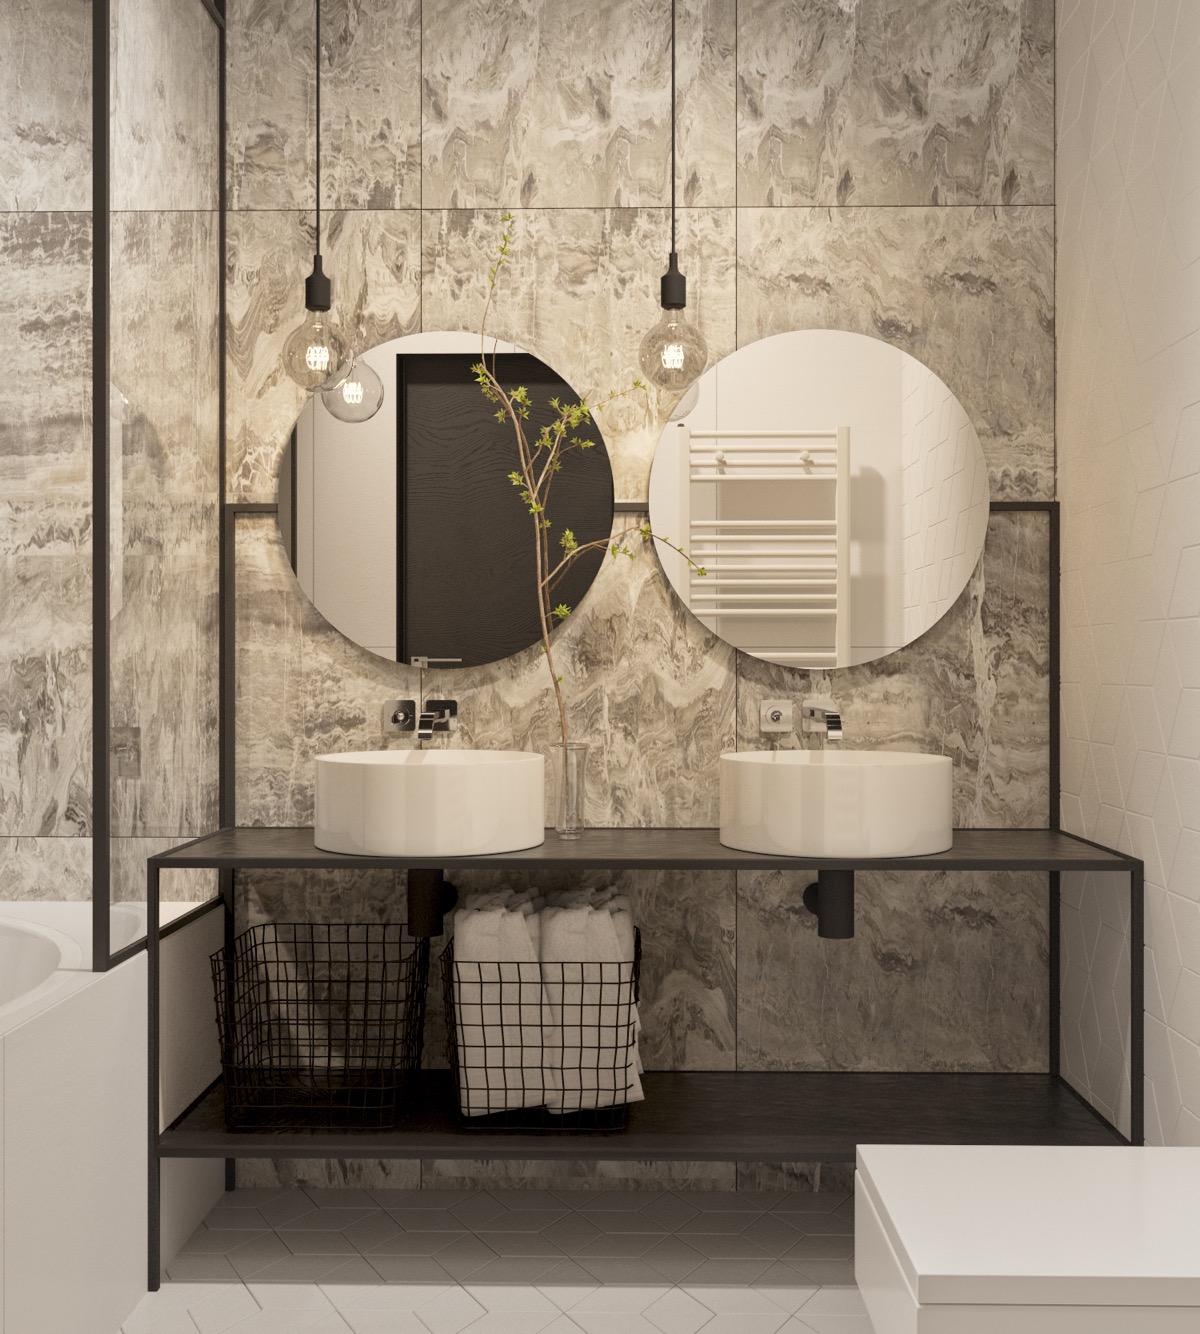 51 Industrial Style Bathrooms Plus Ideas Accessories You Can Copy From Them,Living Room Eco Friendly Interior Design